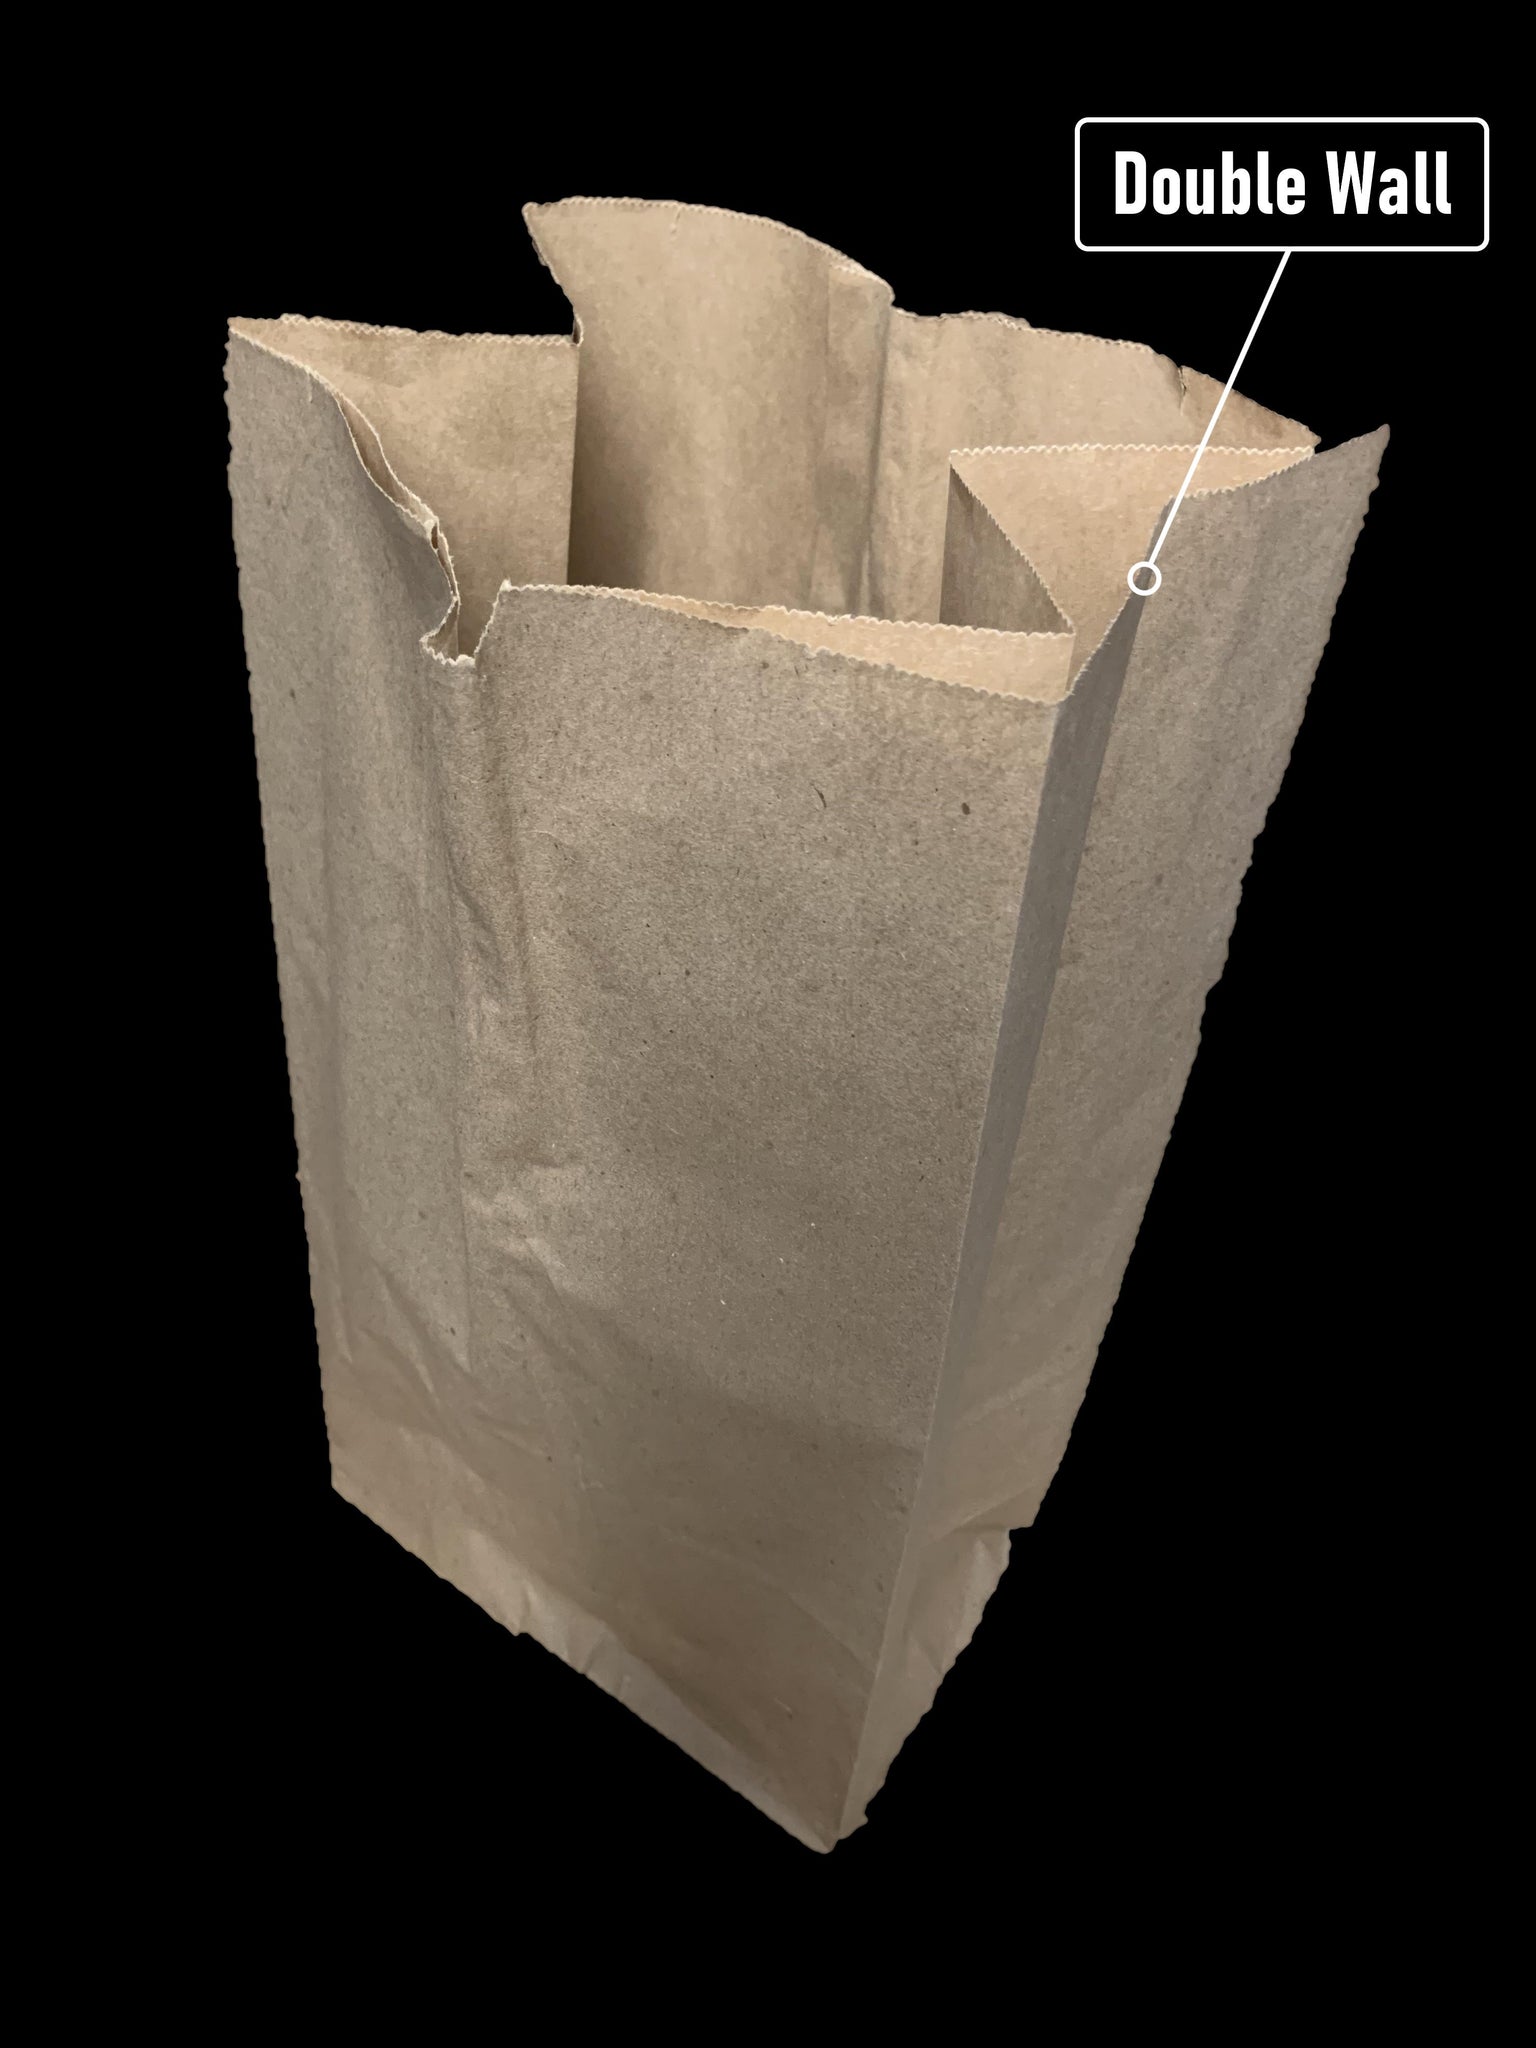 Paper Bags, Brown, 250pcs, #Double-Wall, #25 LB